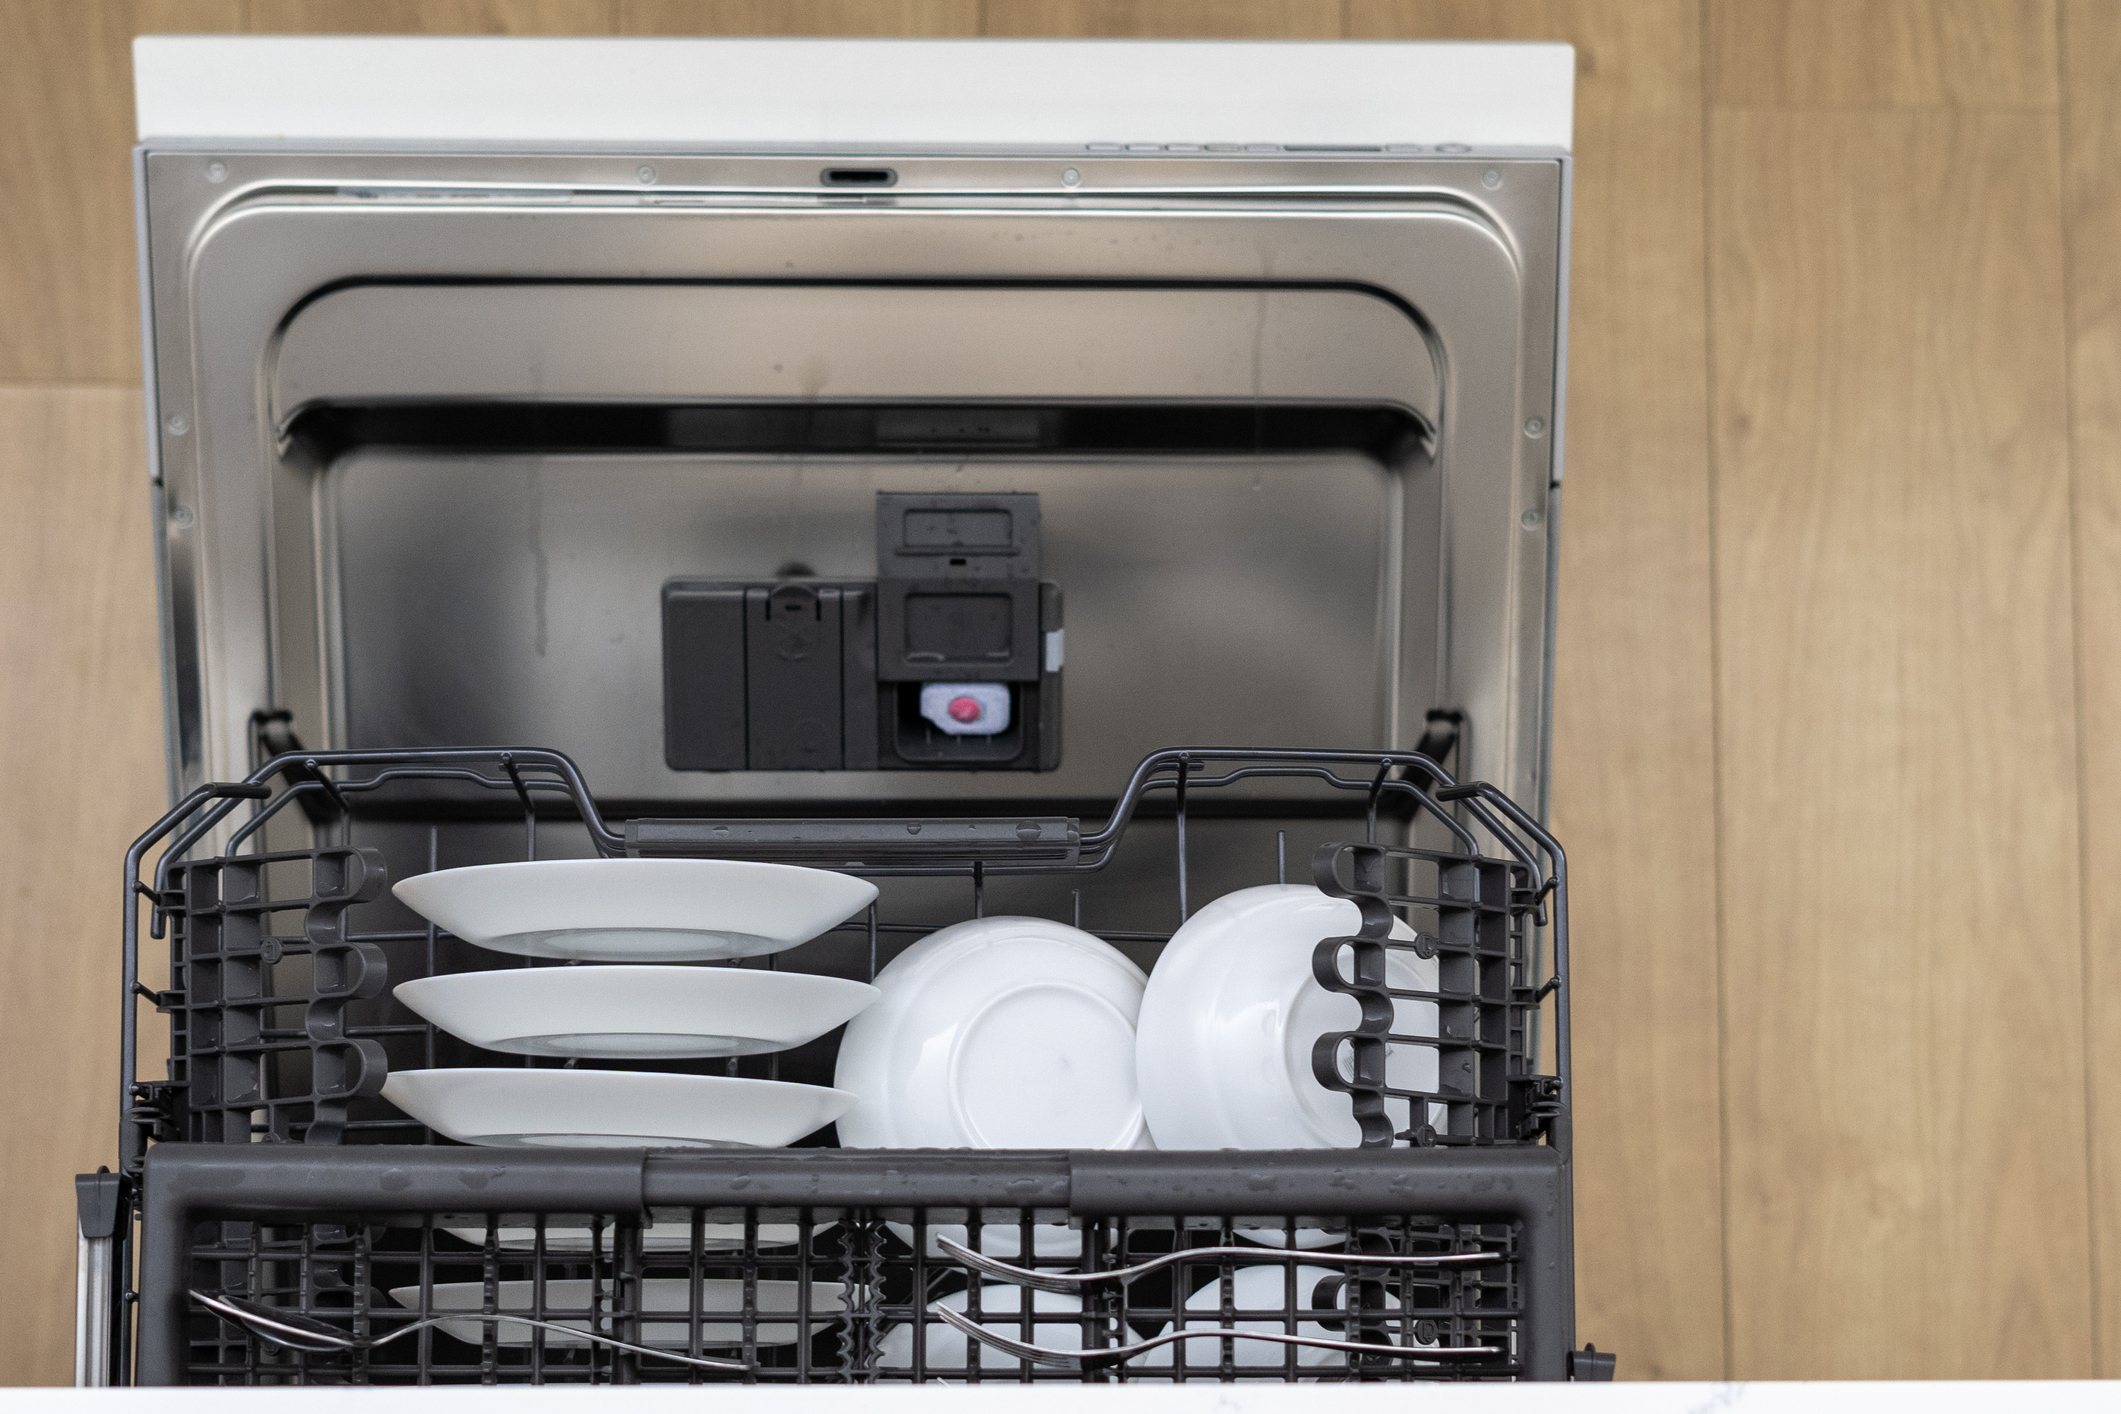 a dishwasher loaded with plates and bowls